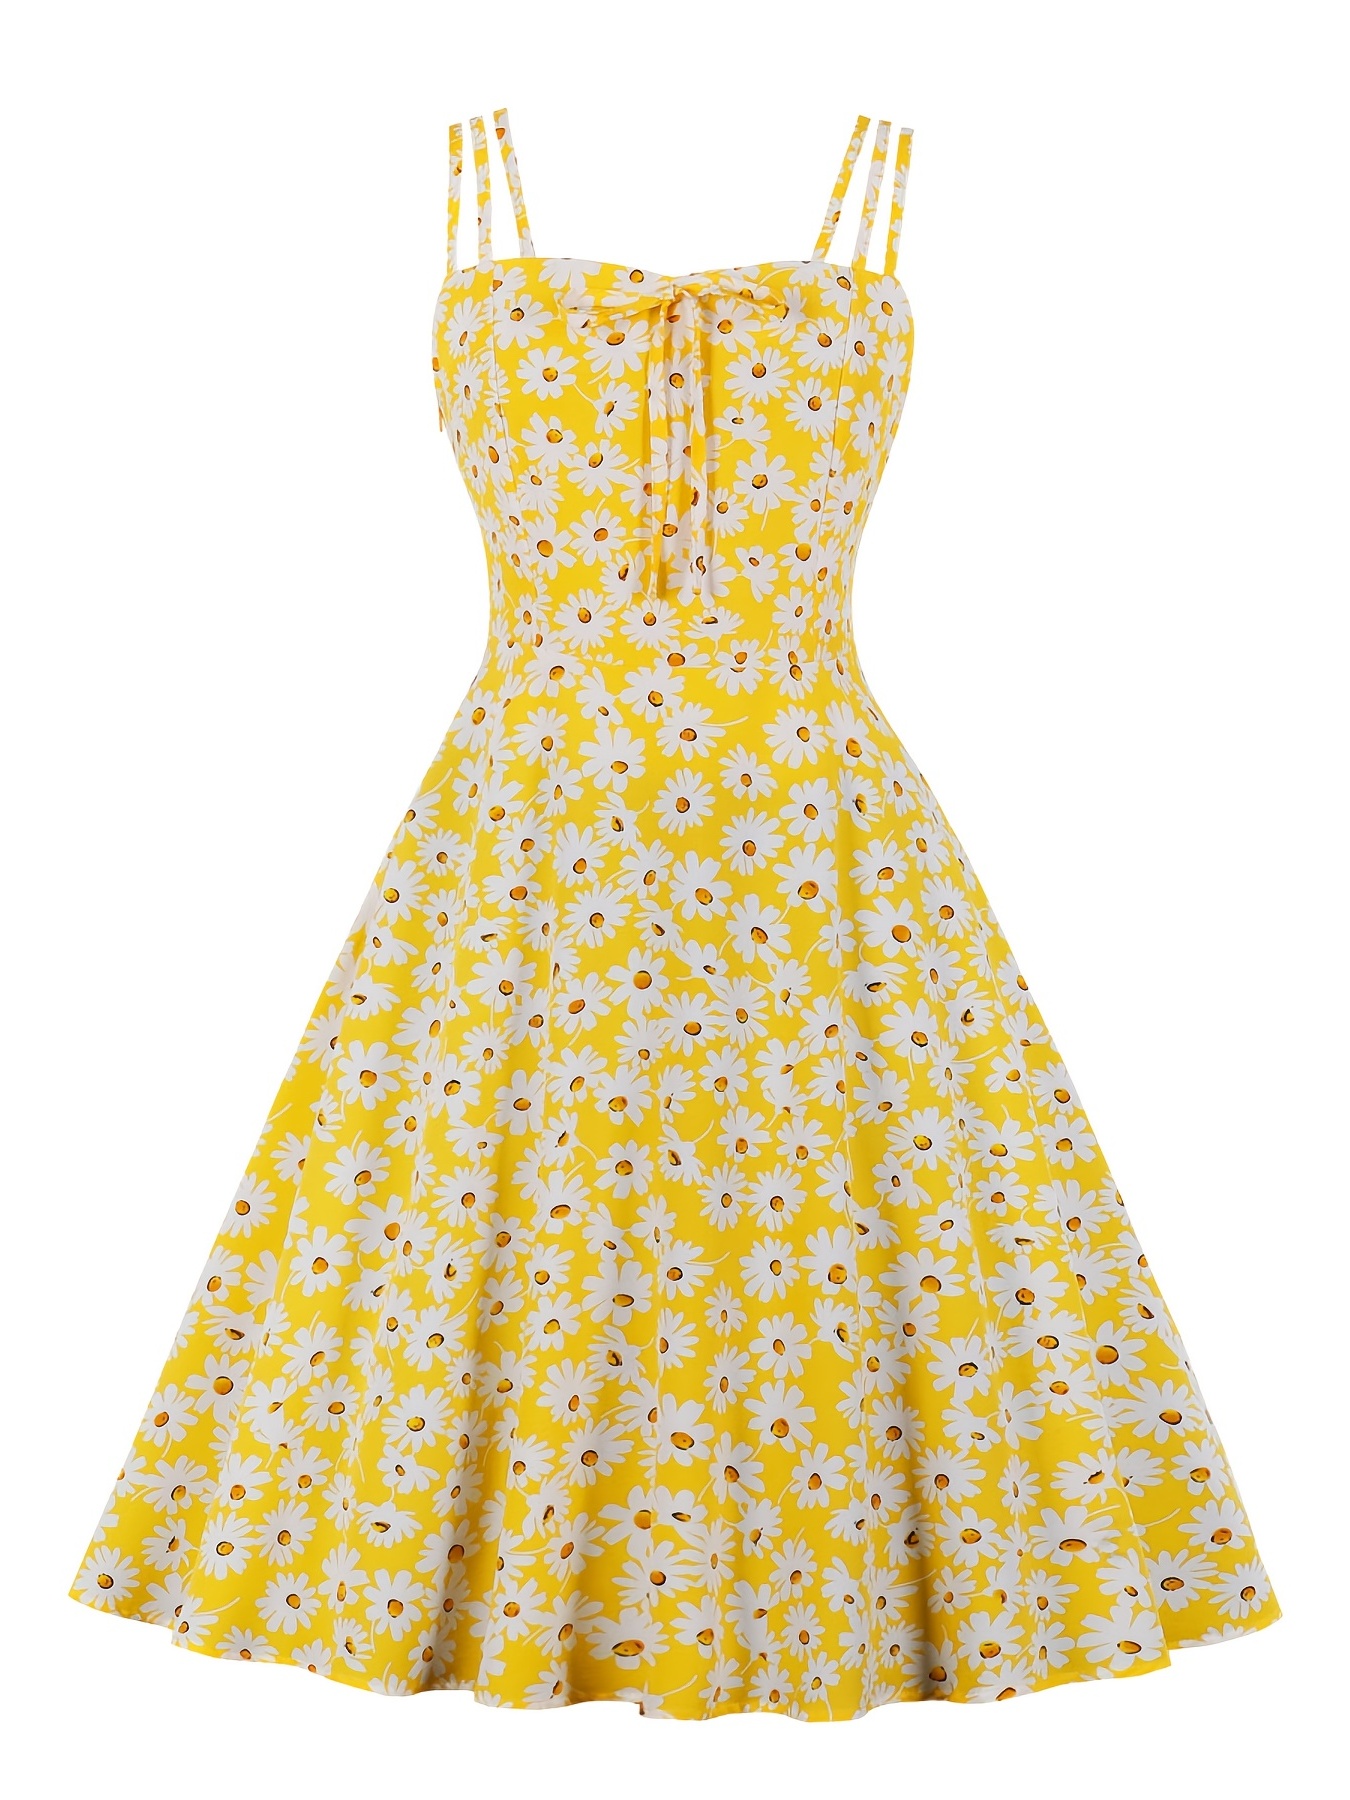 Rockabilly Vintage Yellow Dress for Women 1950s Tea Party Cocktail